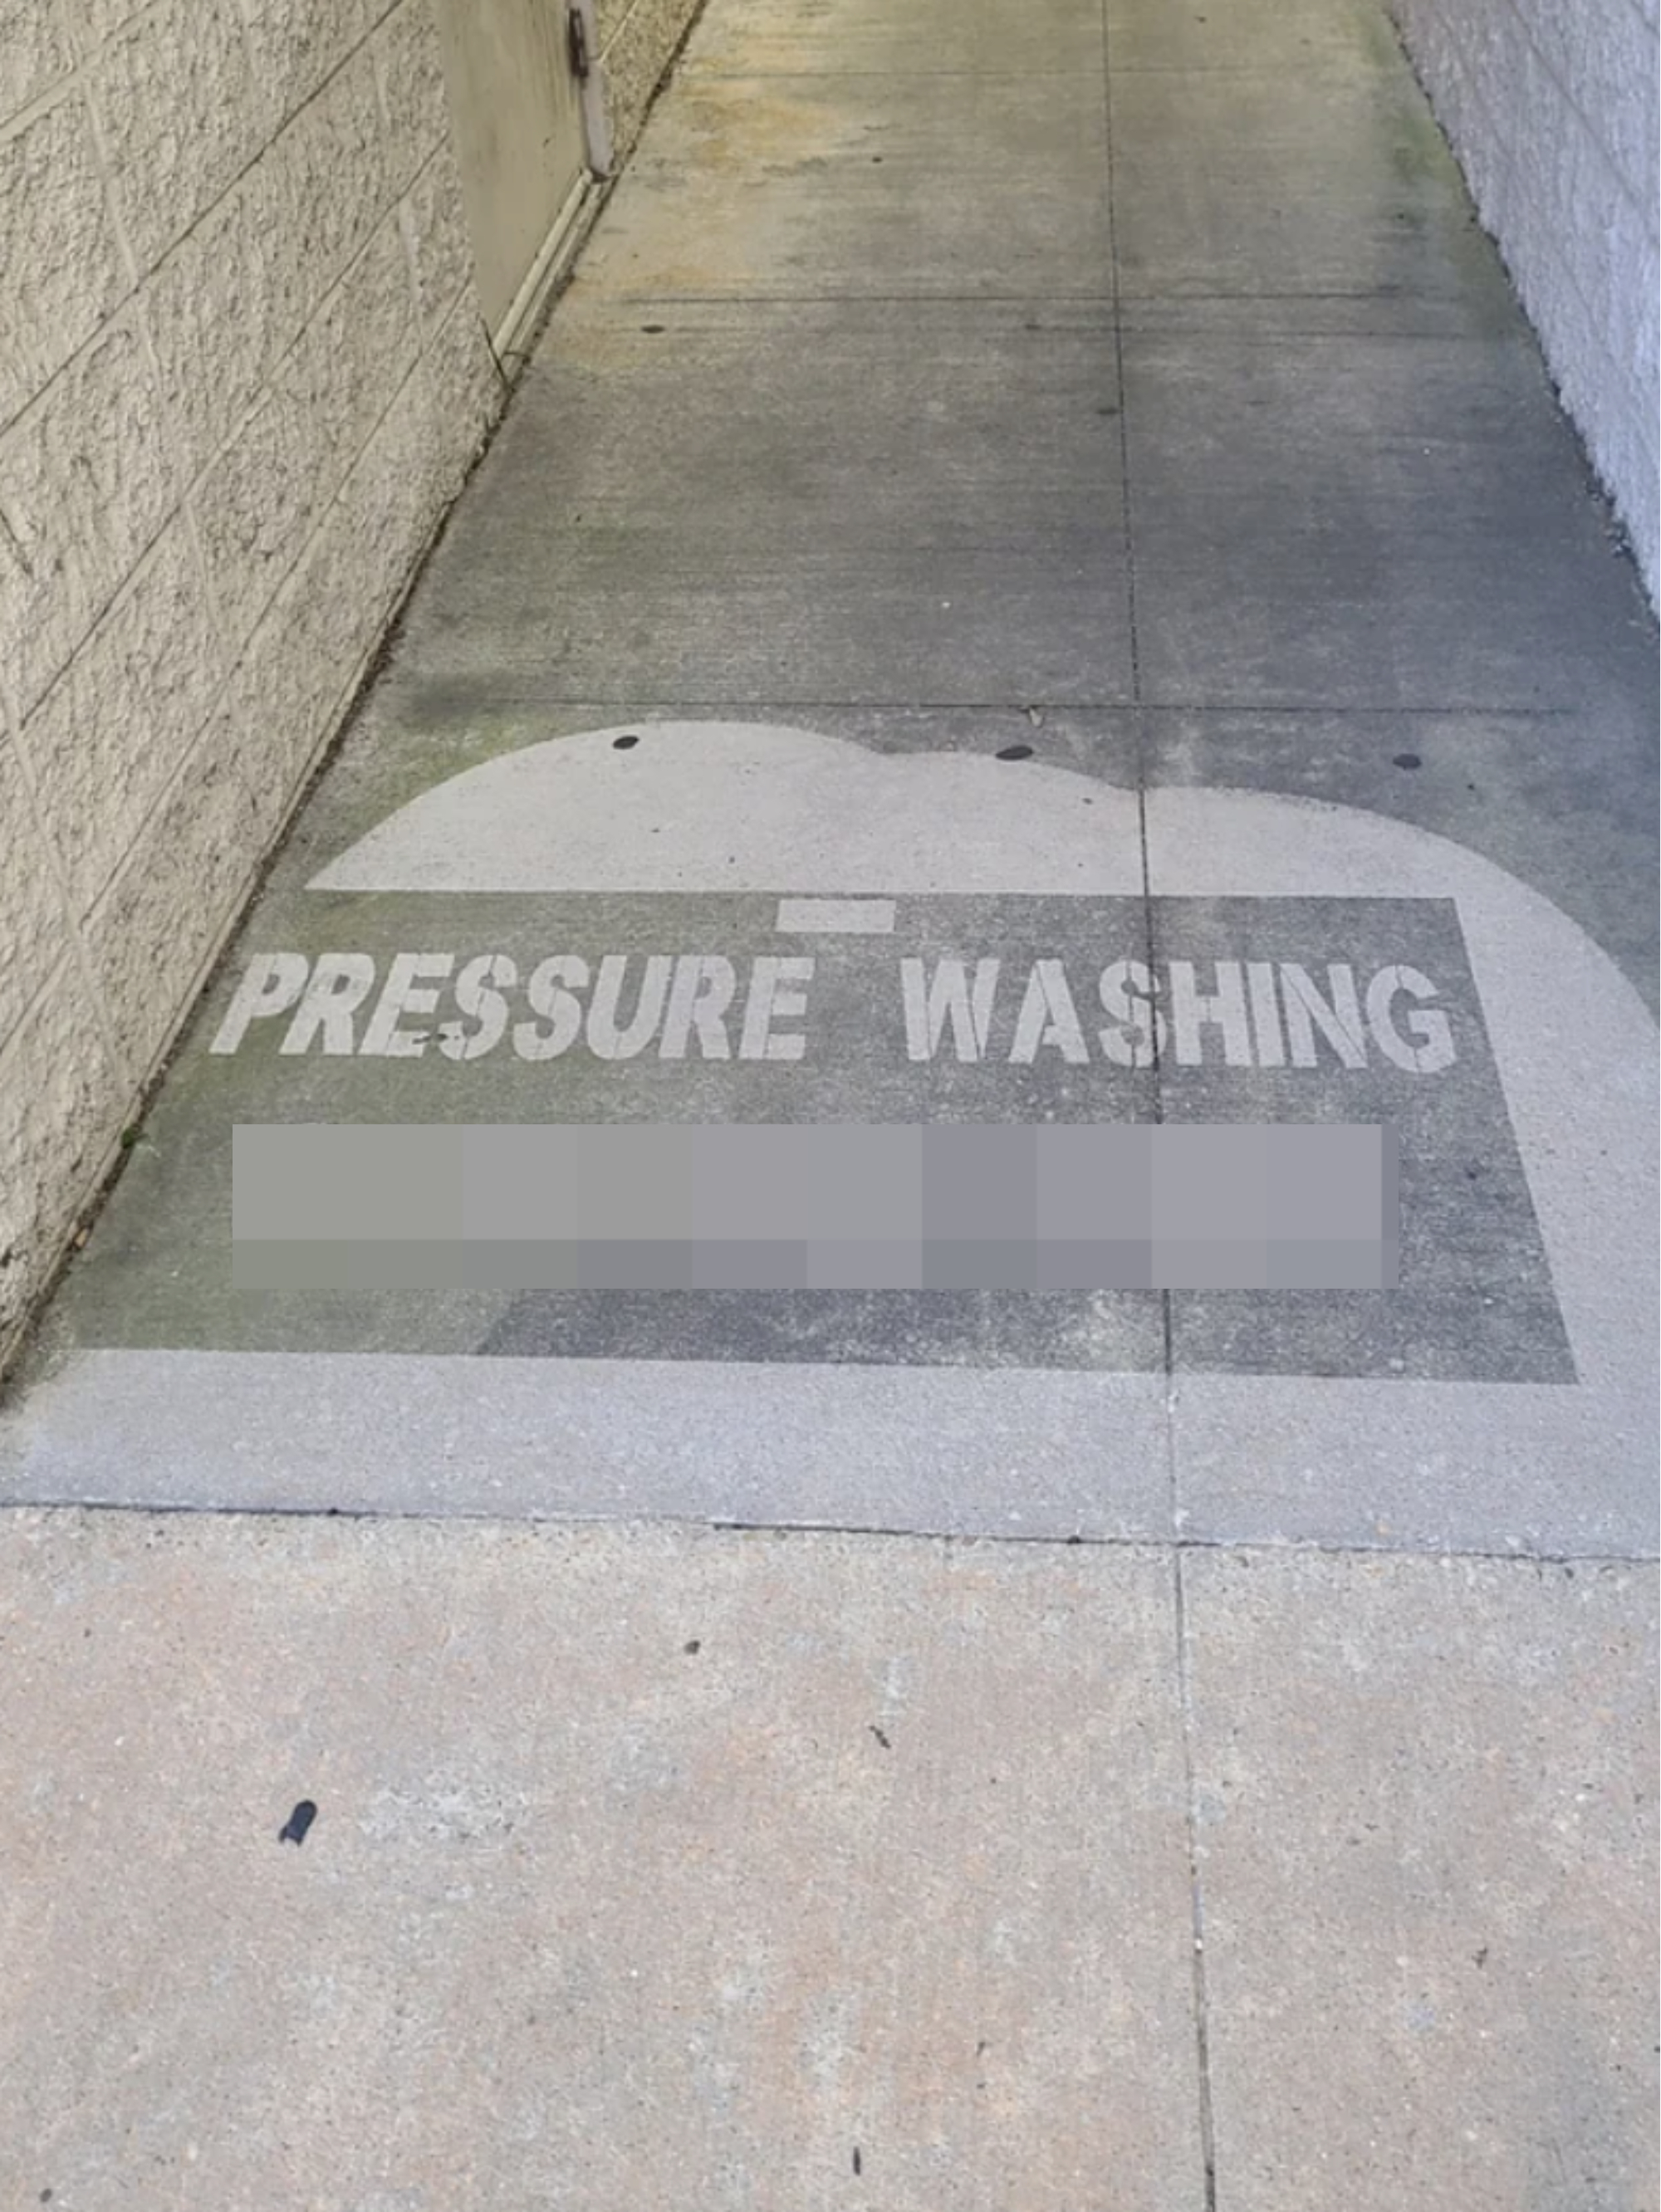 sidewalk pressure-washed in one section to give out business phone number